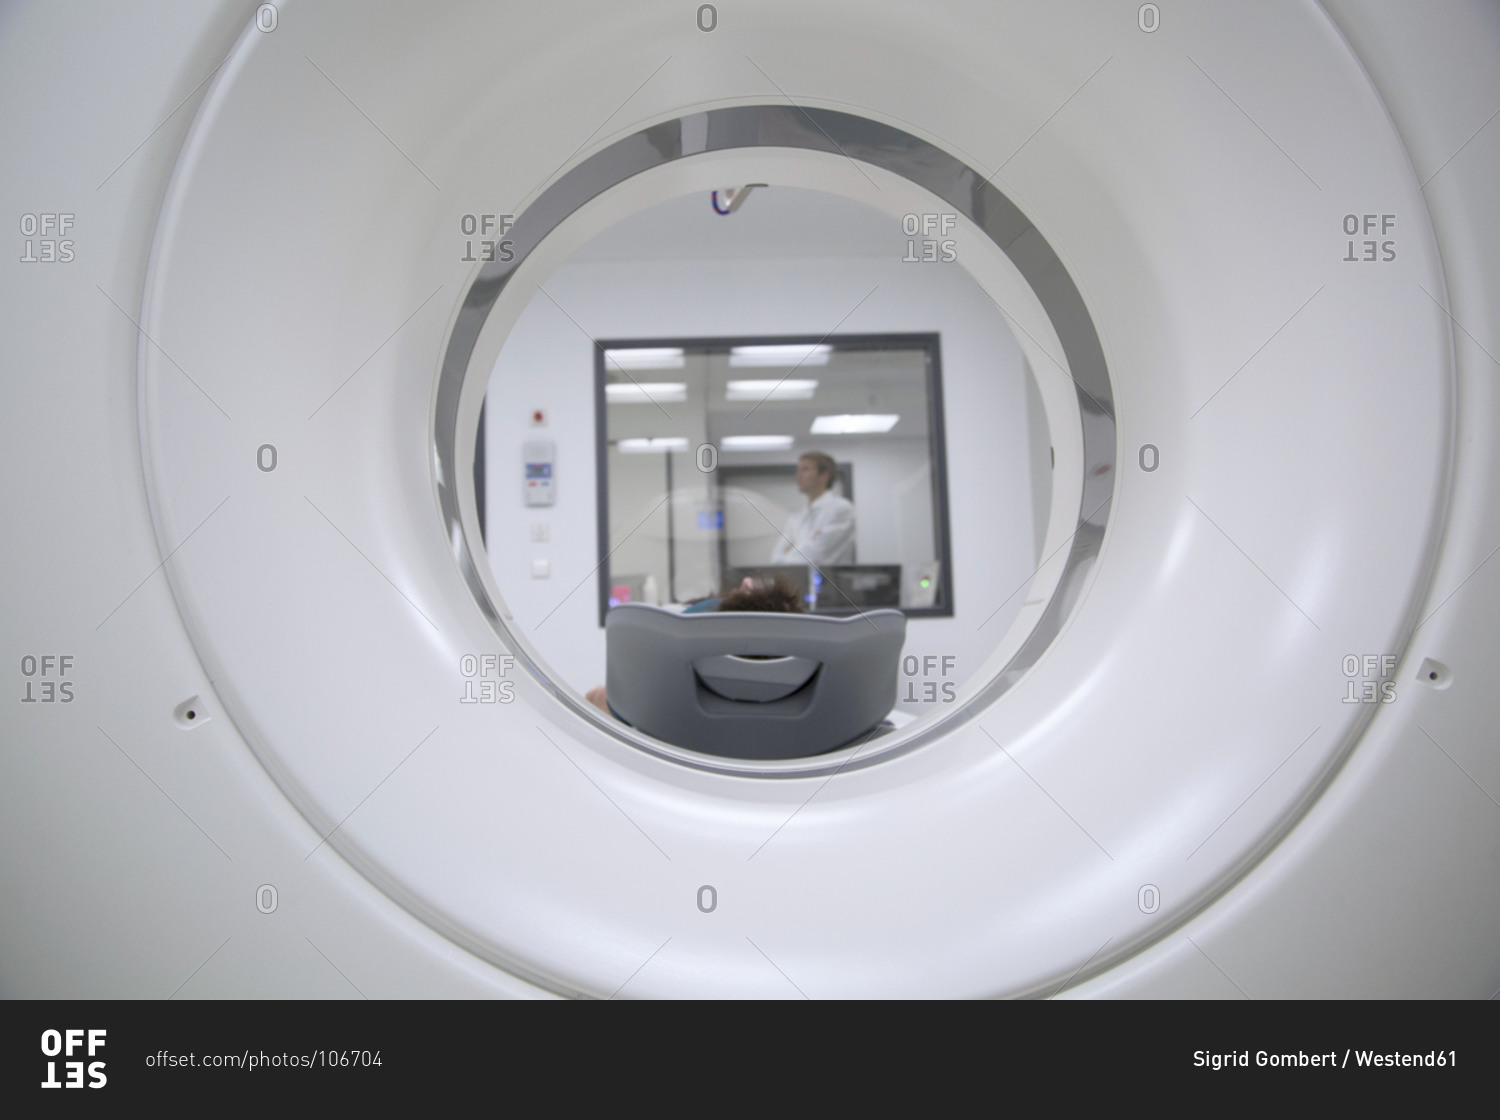 Radiologist at work in hospital